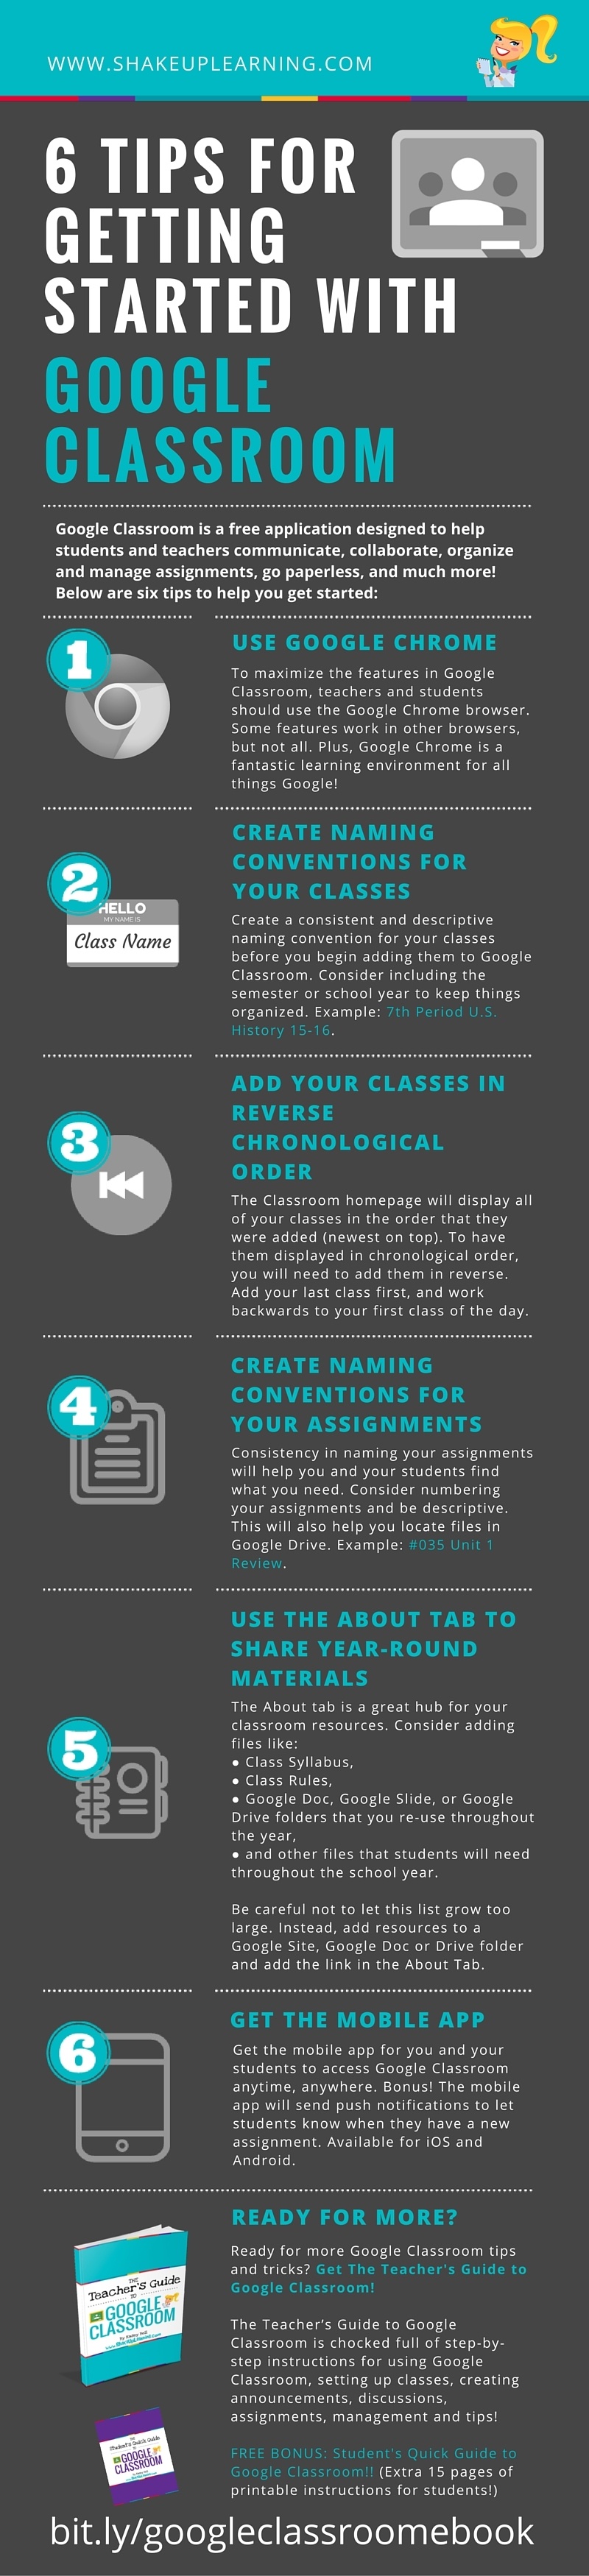 6 Tips for Getting Started with Google Classroom Infographic